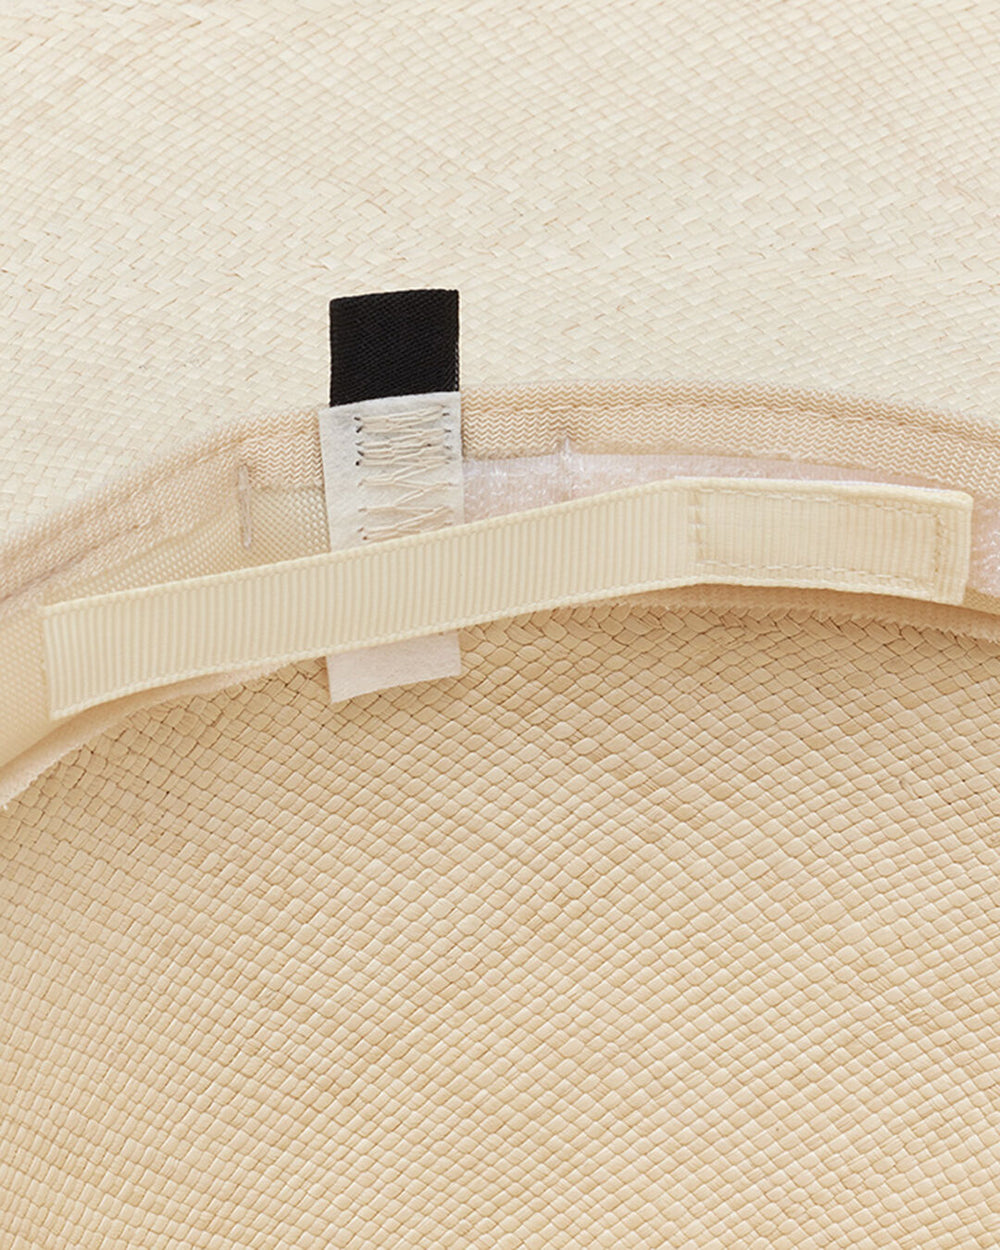 Close-up of a hat's inner ribbon and label.